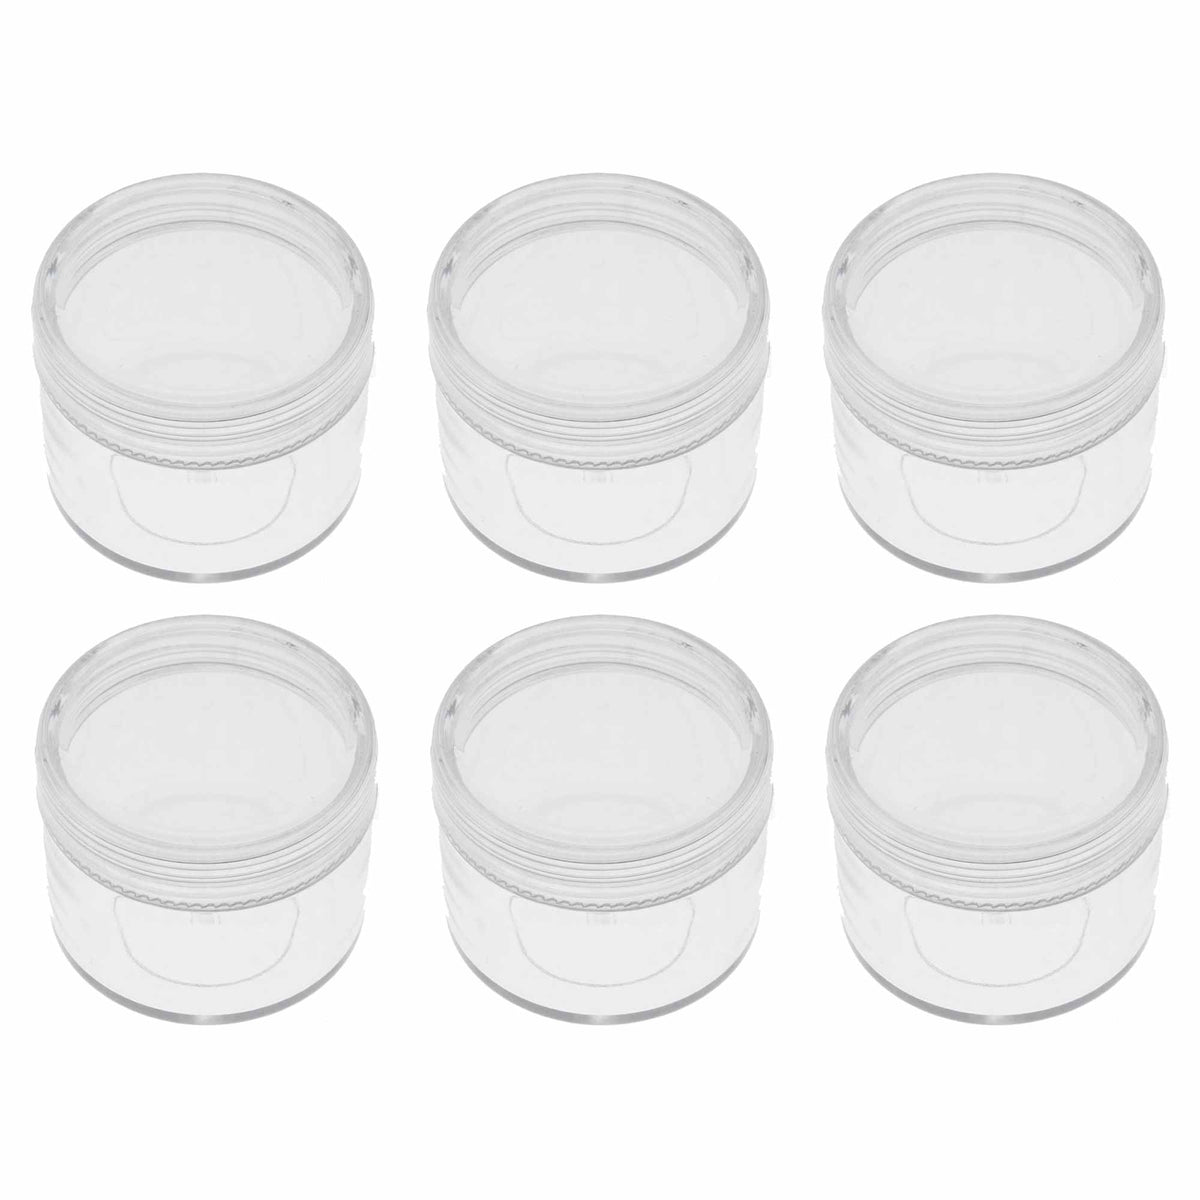 Snapware Plastic Small Round Containers - 2 Pack - Transparent